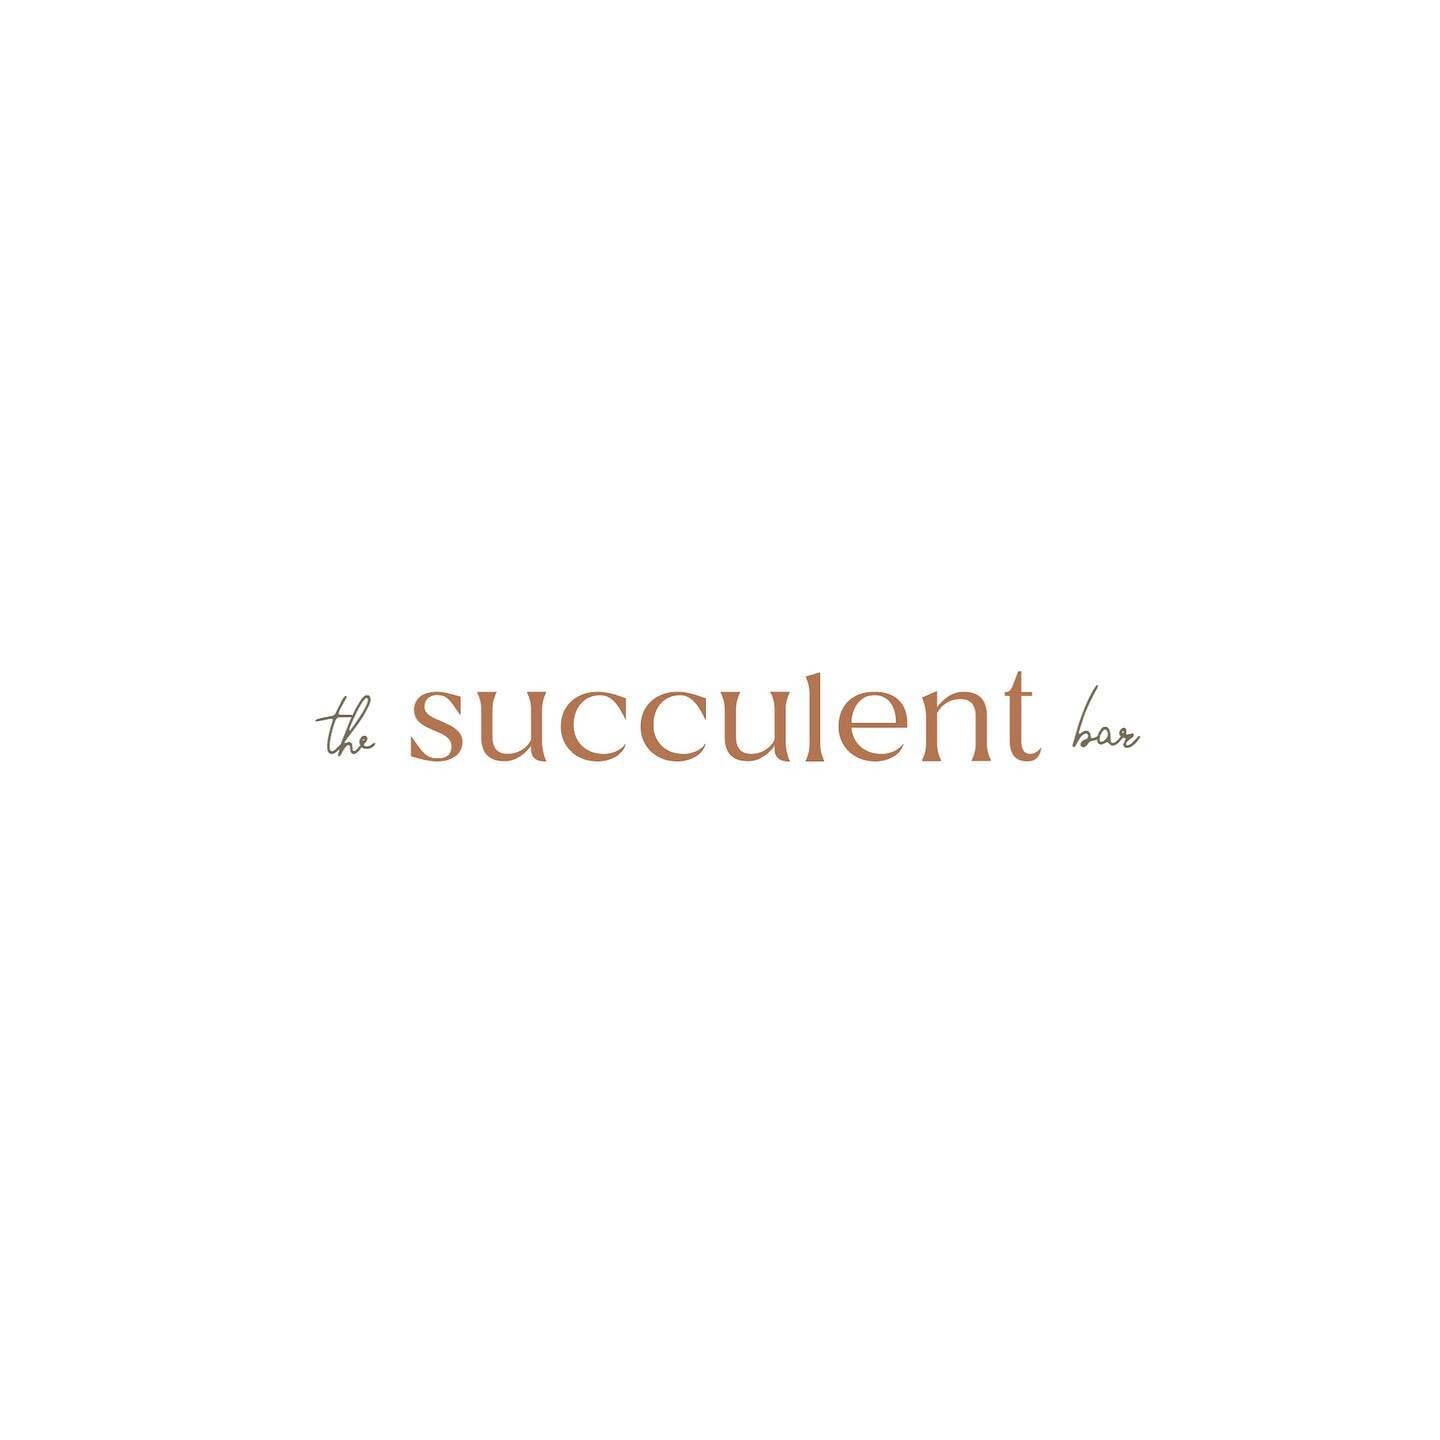 I&rsquo;ve been working on resurrecting an old little side project lately. If all goes to plan, you can follow along over at @thesucculentbar to check it out! Hopefully more details to come soon!
.
.
.
#thesucculentbar #studioraye #designstudio #grap